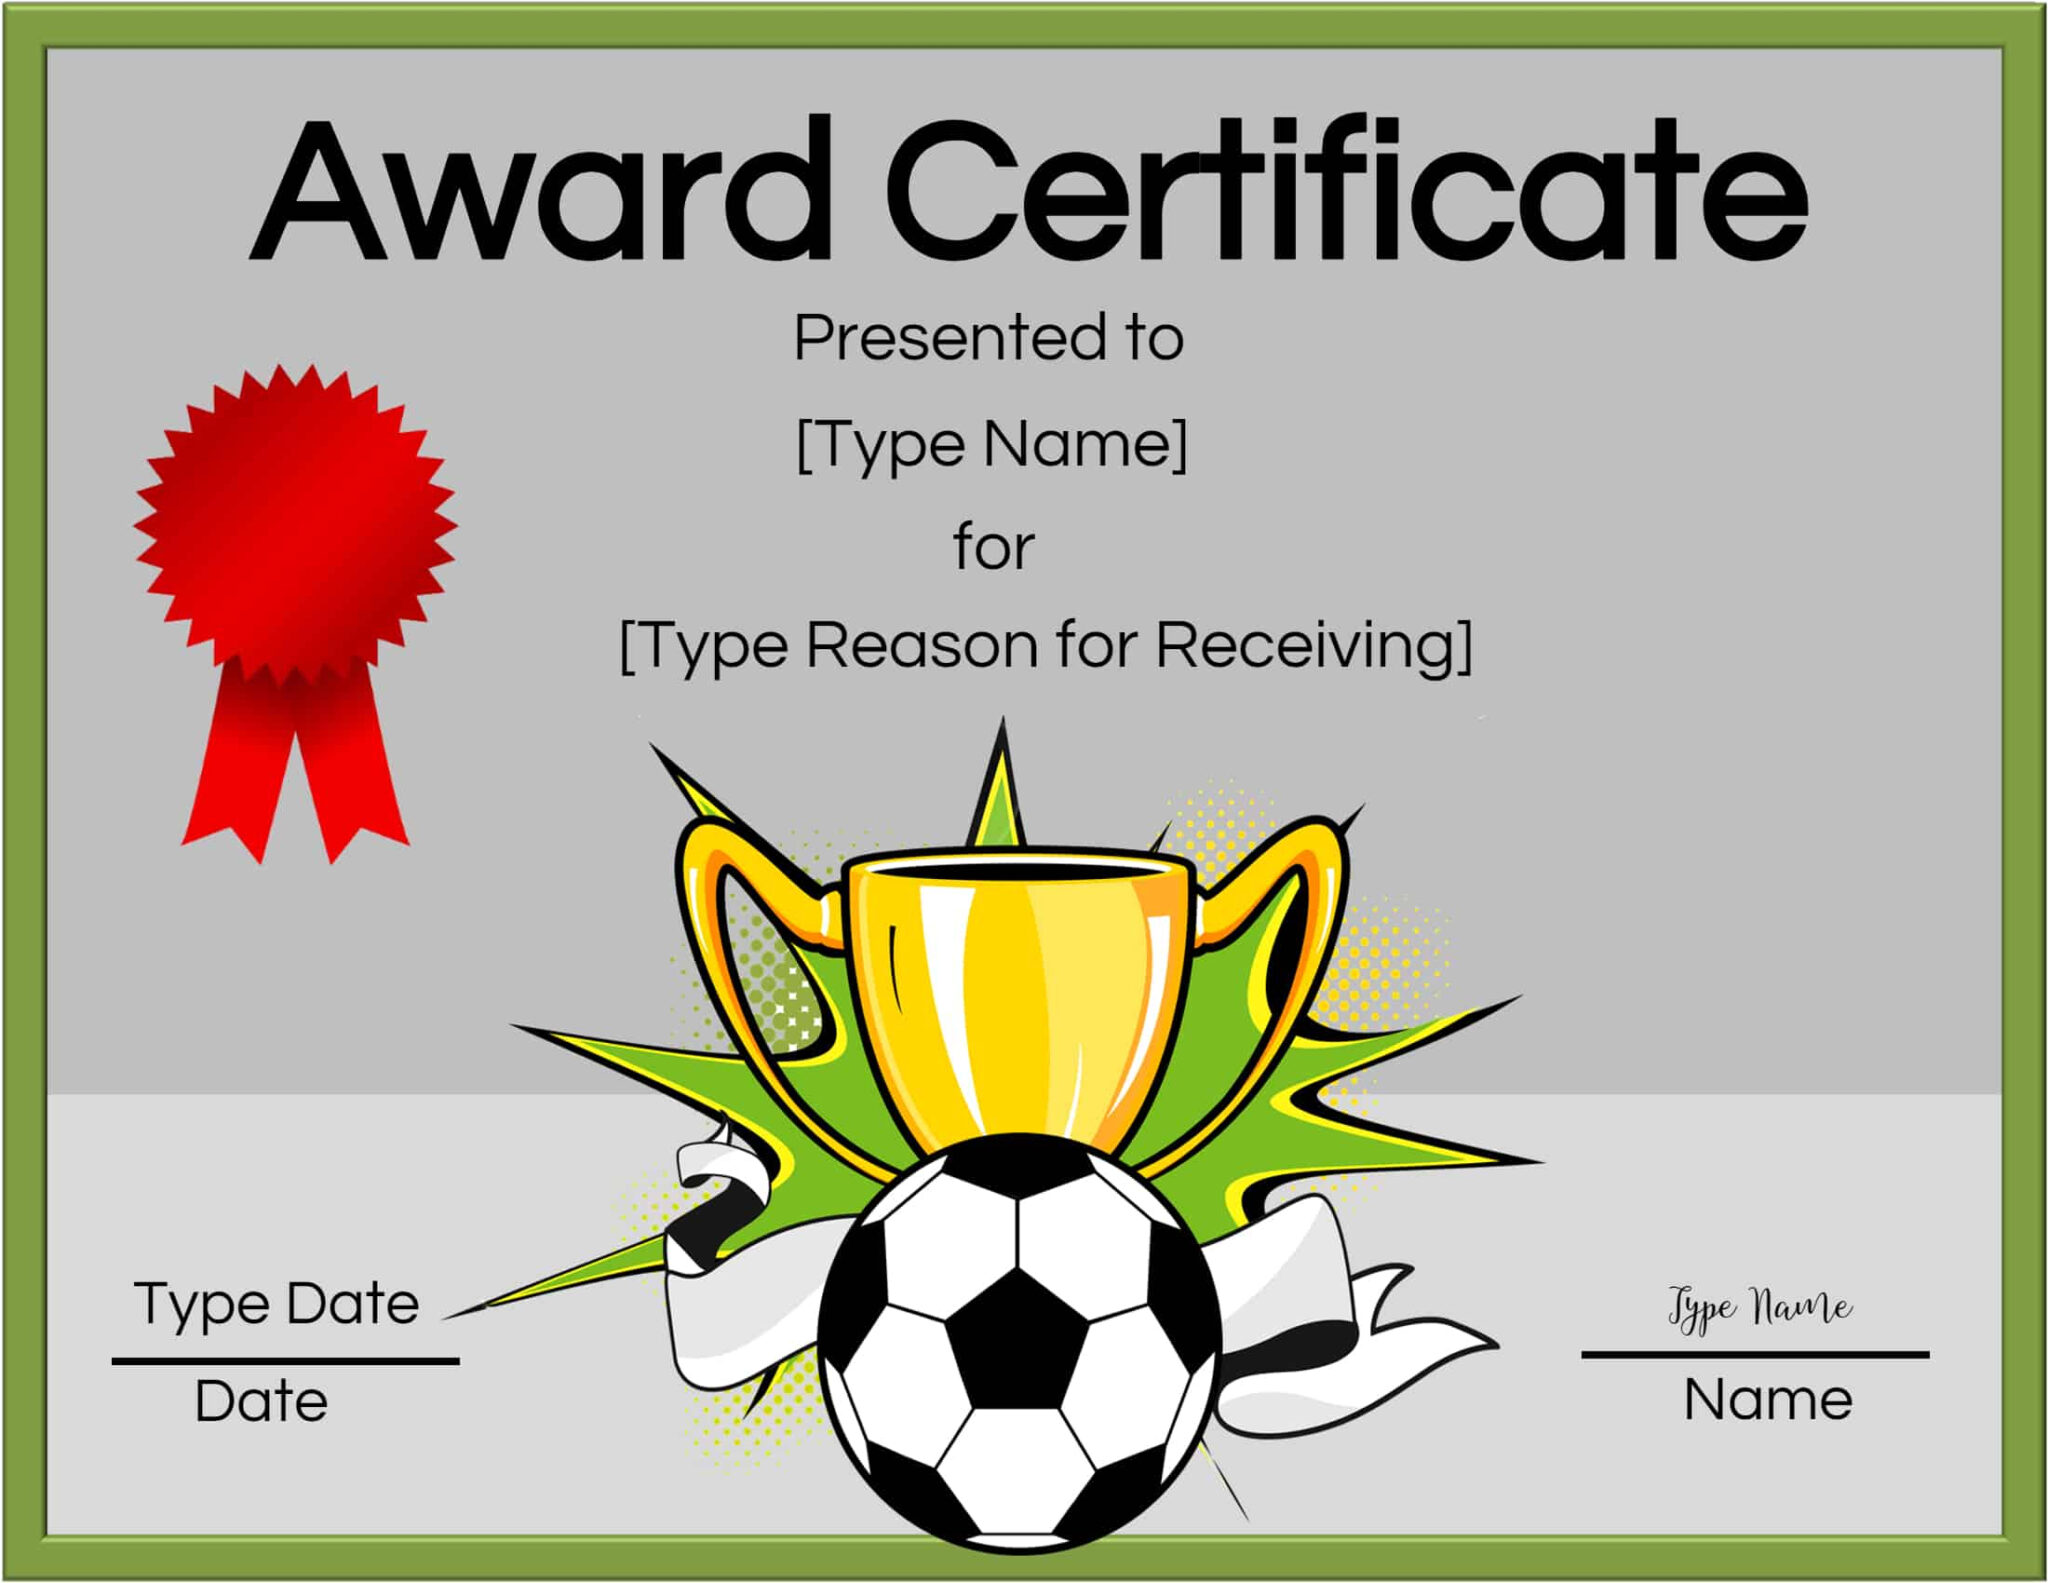 Free Soccer Certificate Maker Edit Online And Print At Home